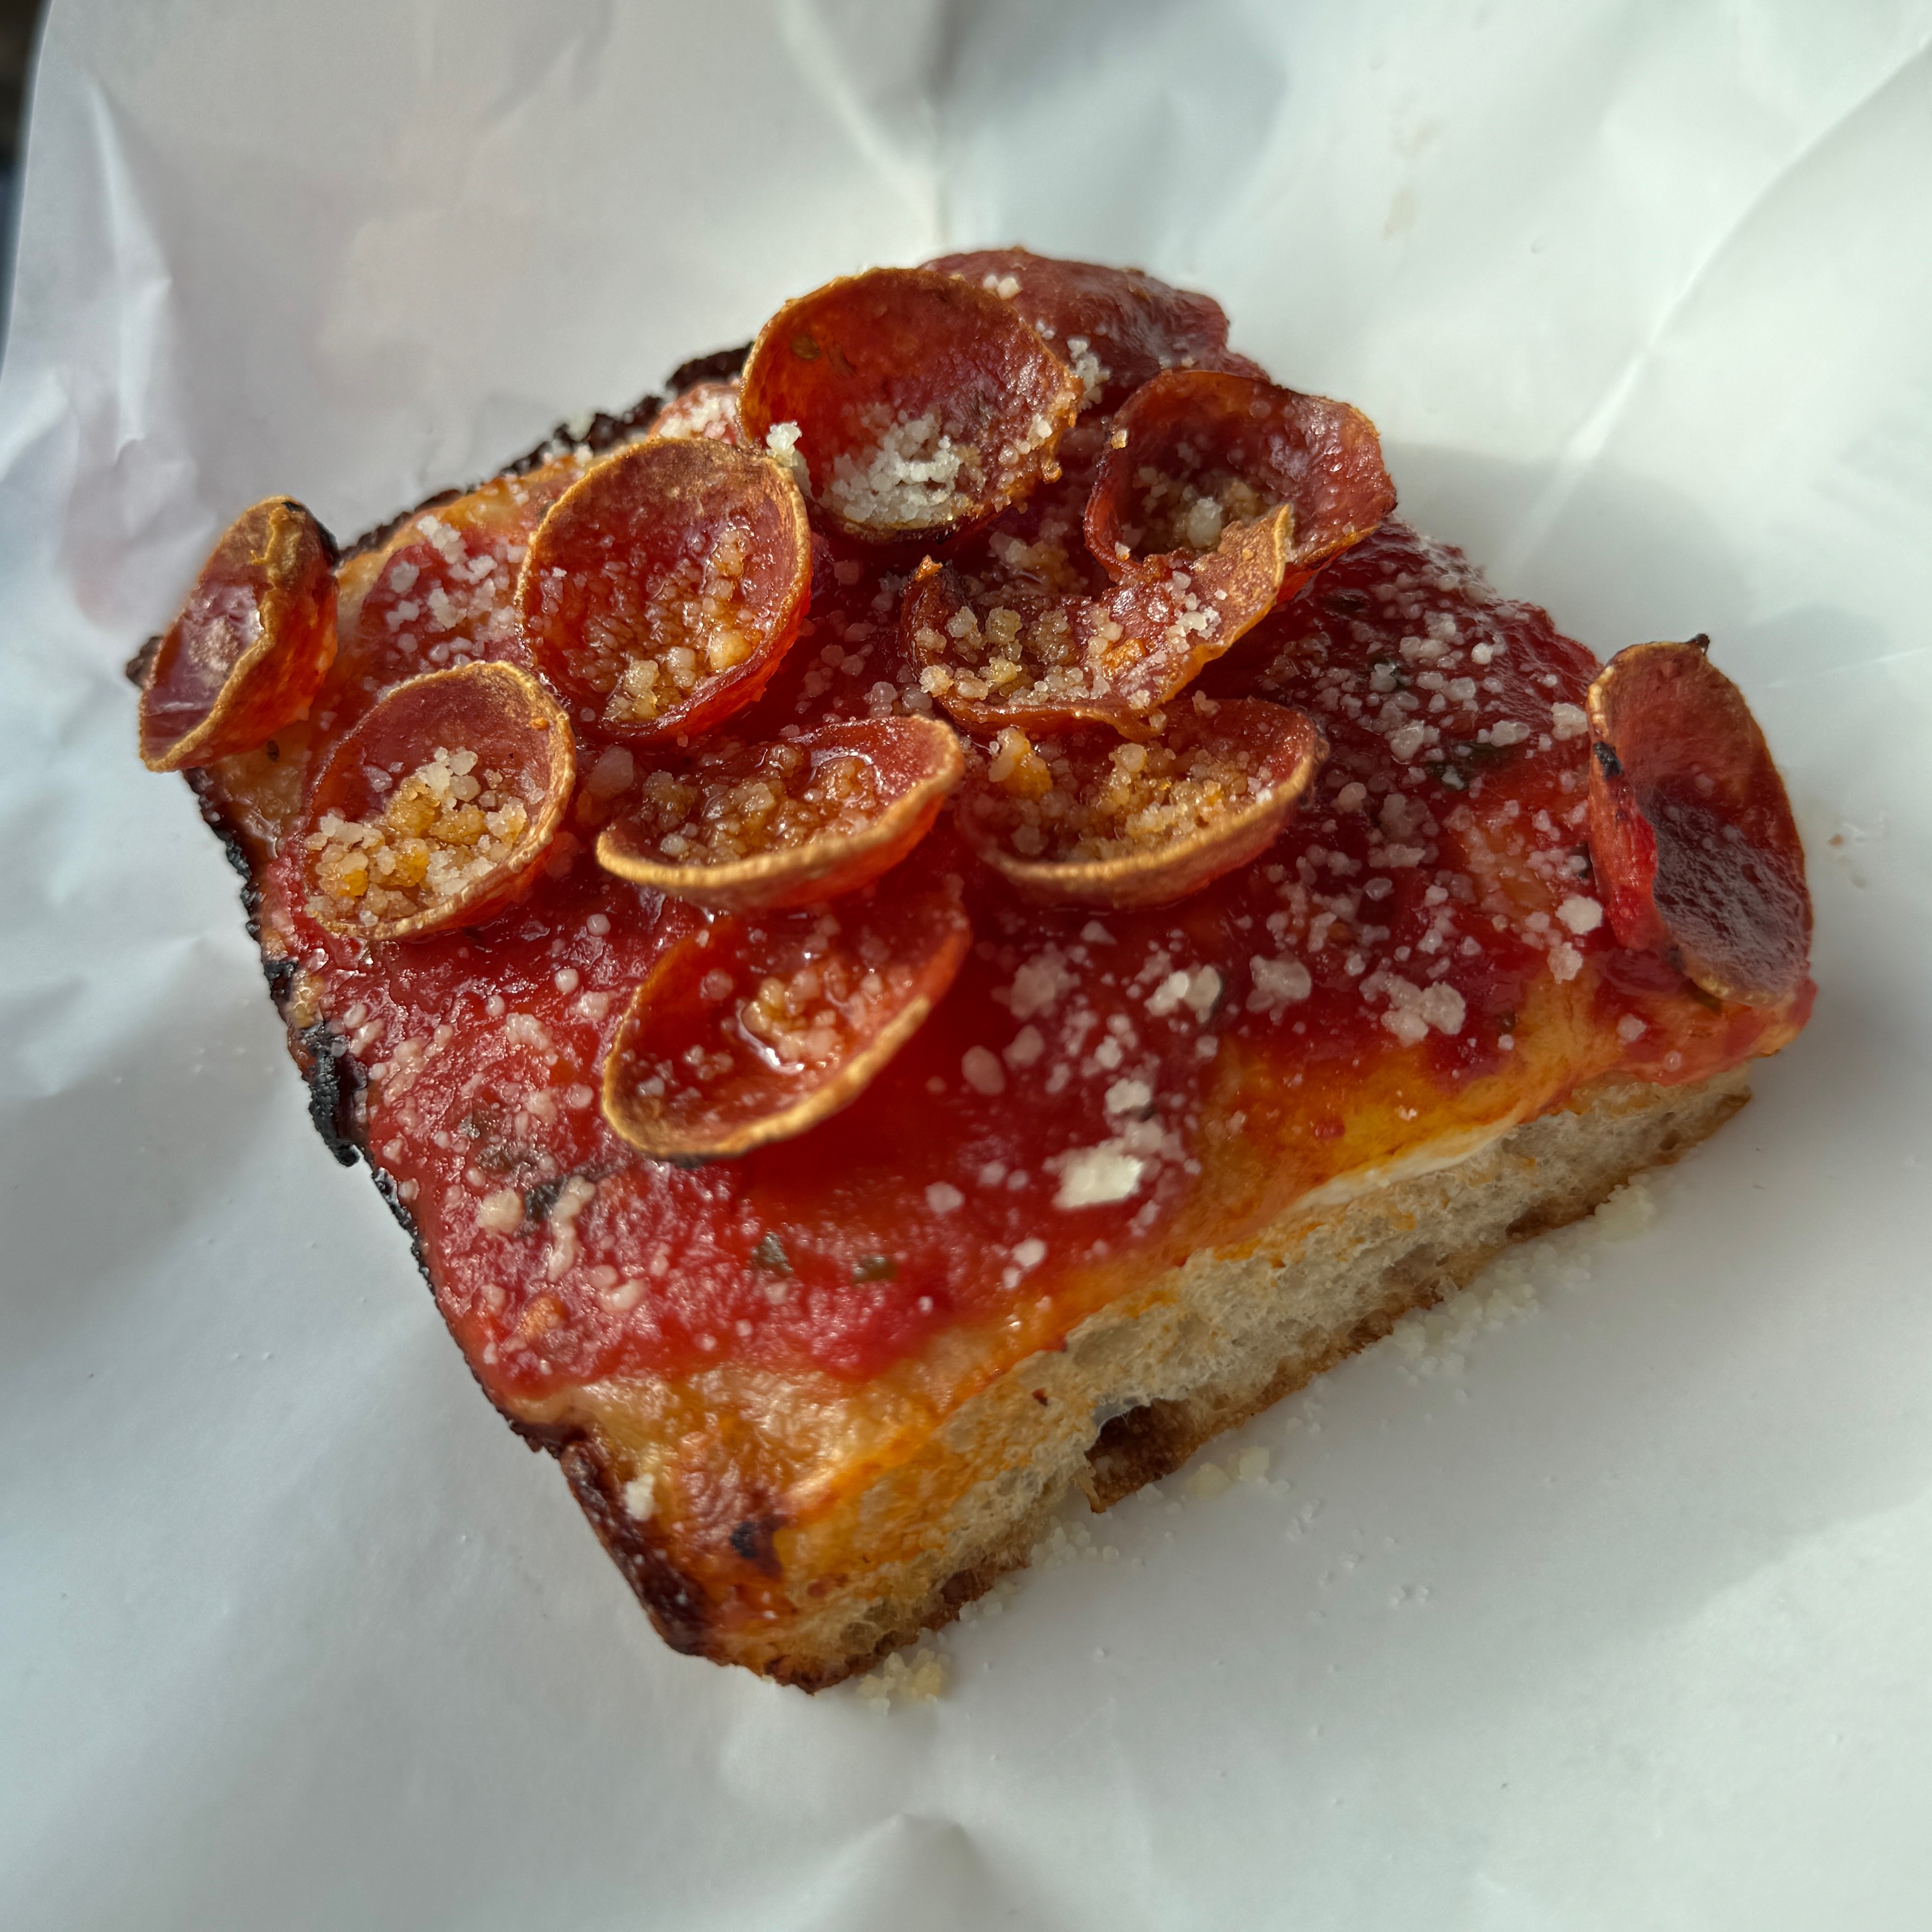 Pepperoni Slice $6.25 (was $5.50) at Quarter Sheets Pizza Club on #foodmento http://foodmento.com/place/14127